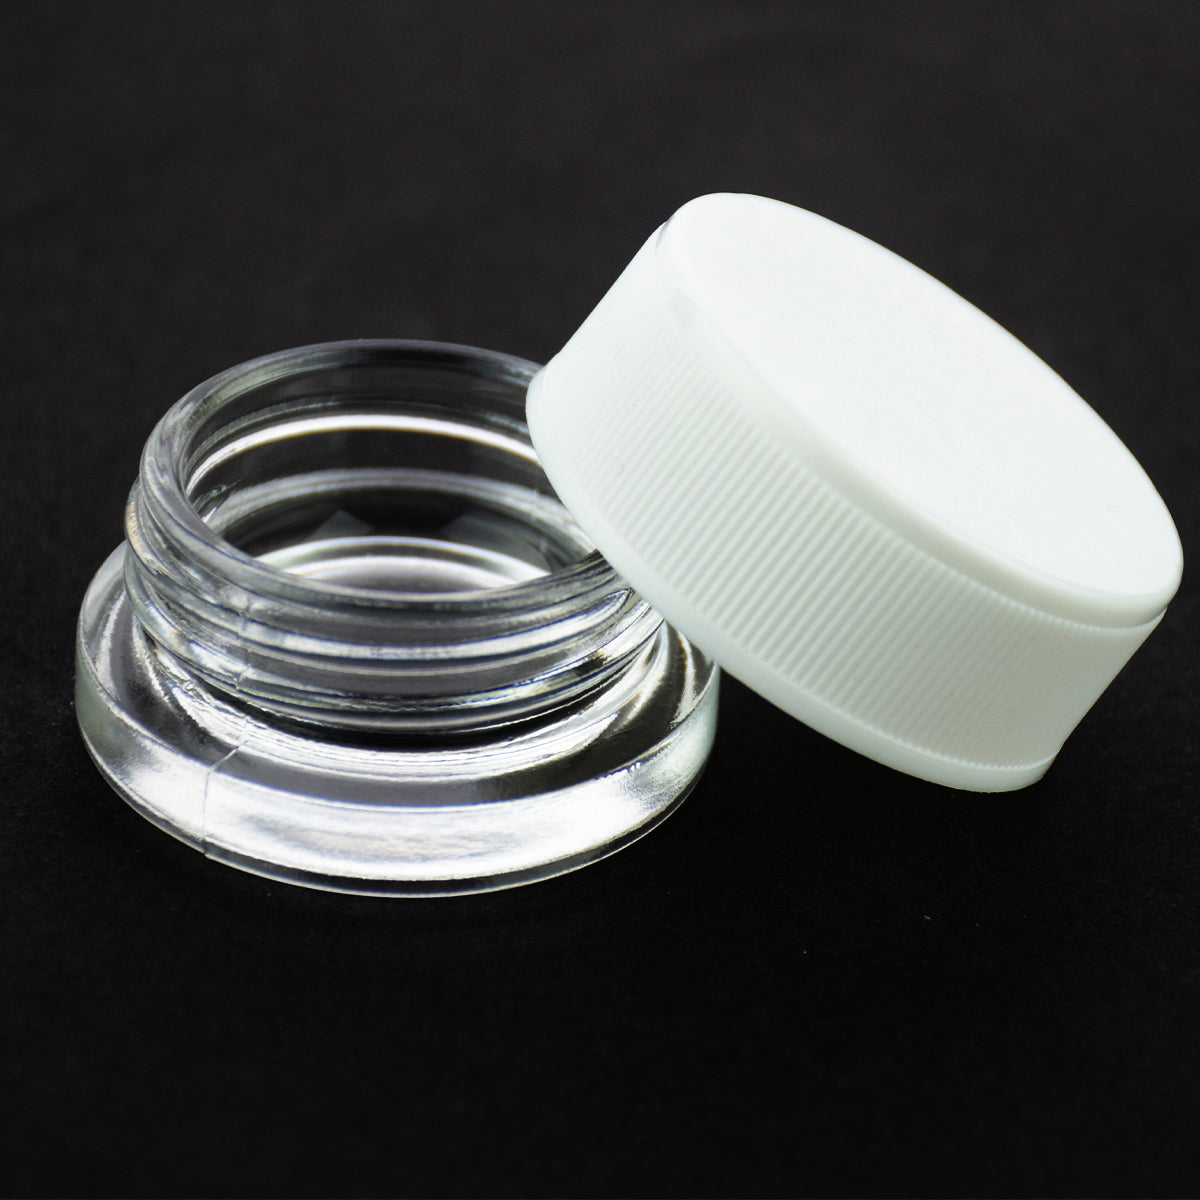 7ml CONCENTRATE GLASS JARS WITH BLACK CAP